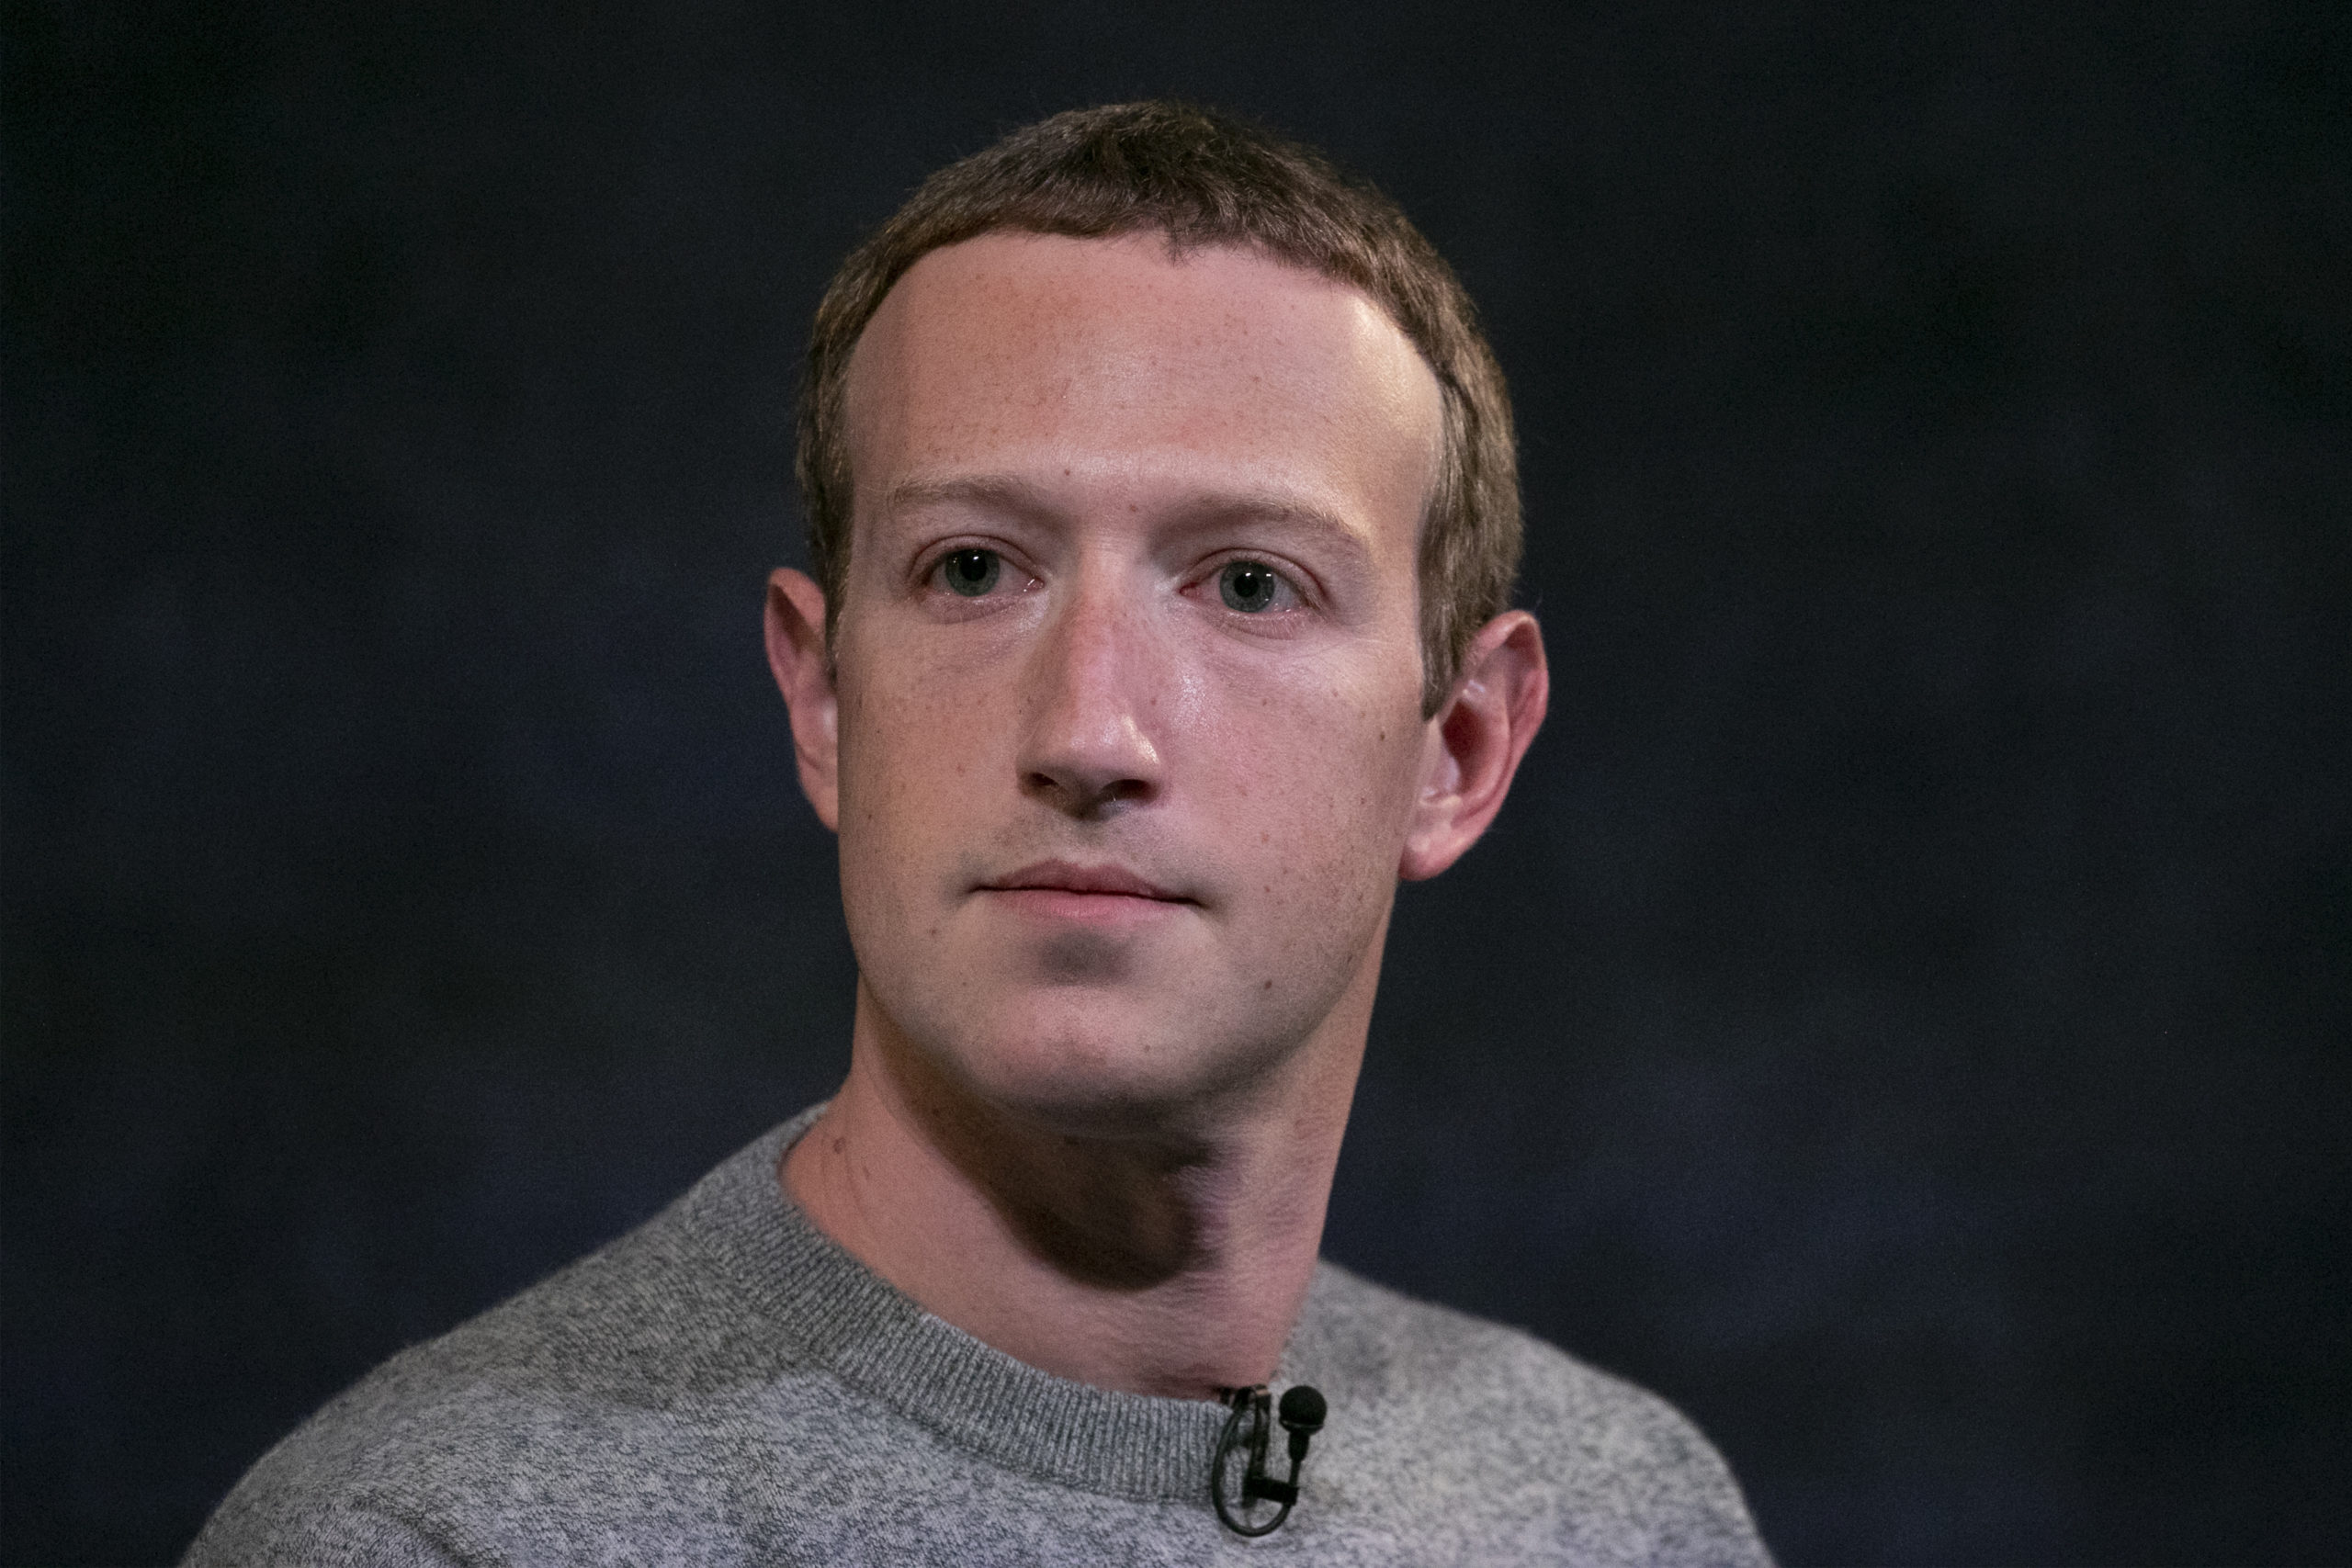 Meta CEO Mark Zuckerberg is seen in a file photo from October 2019. A House committee called off a vote Thursday on a recommendation that Zuckerberg be held in contempt of Congress for failing to fully supply documents related to an investigation into alleged censorship by tech companies of conservatives.